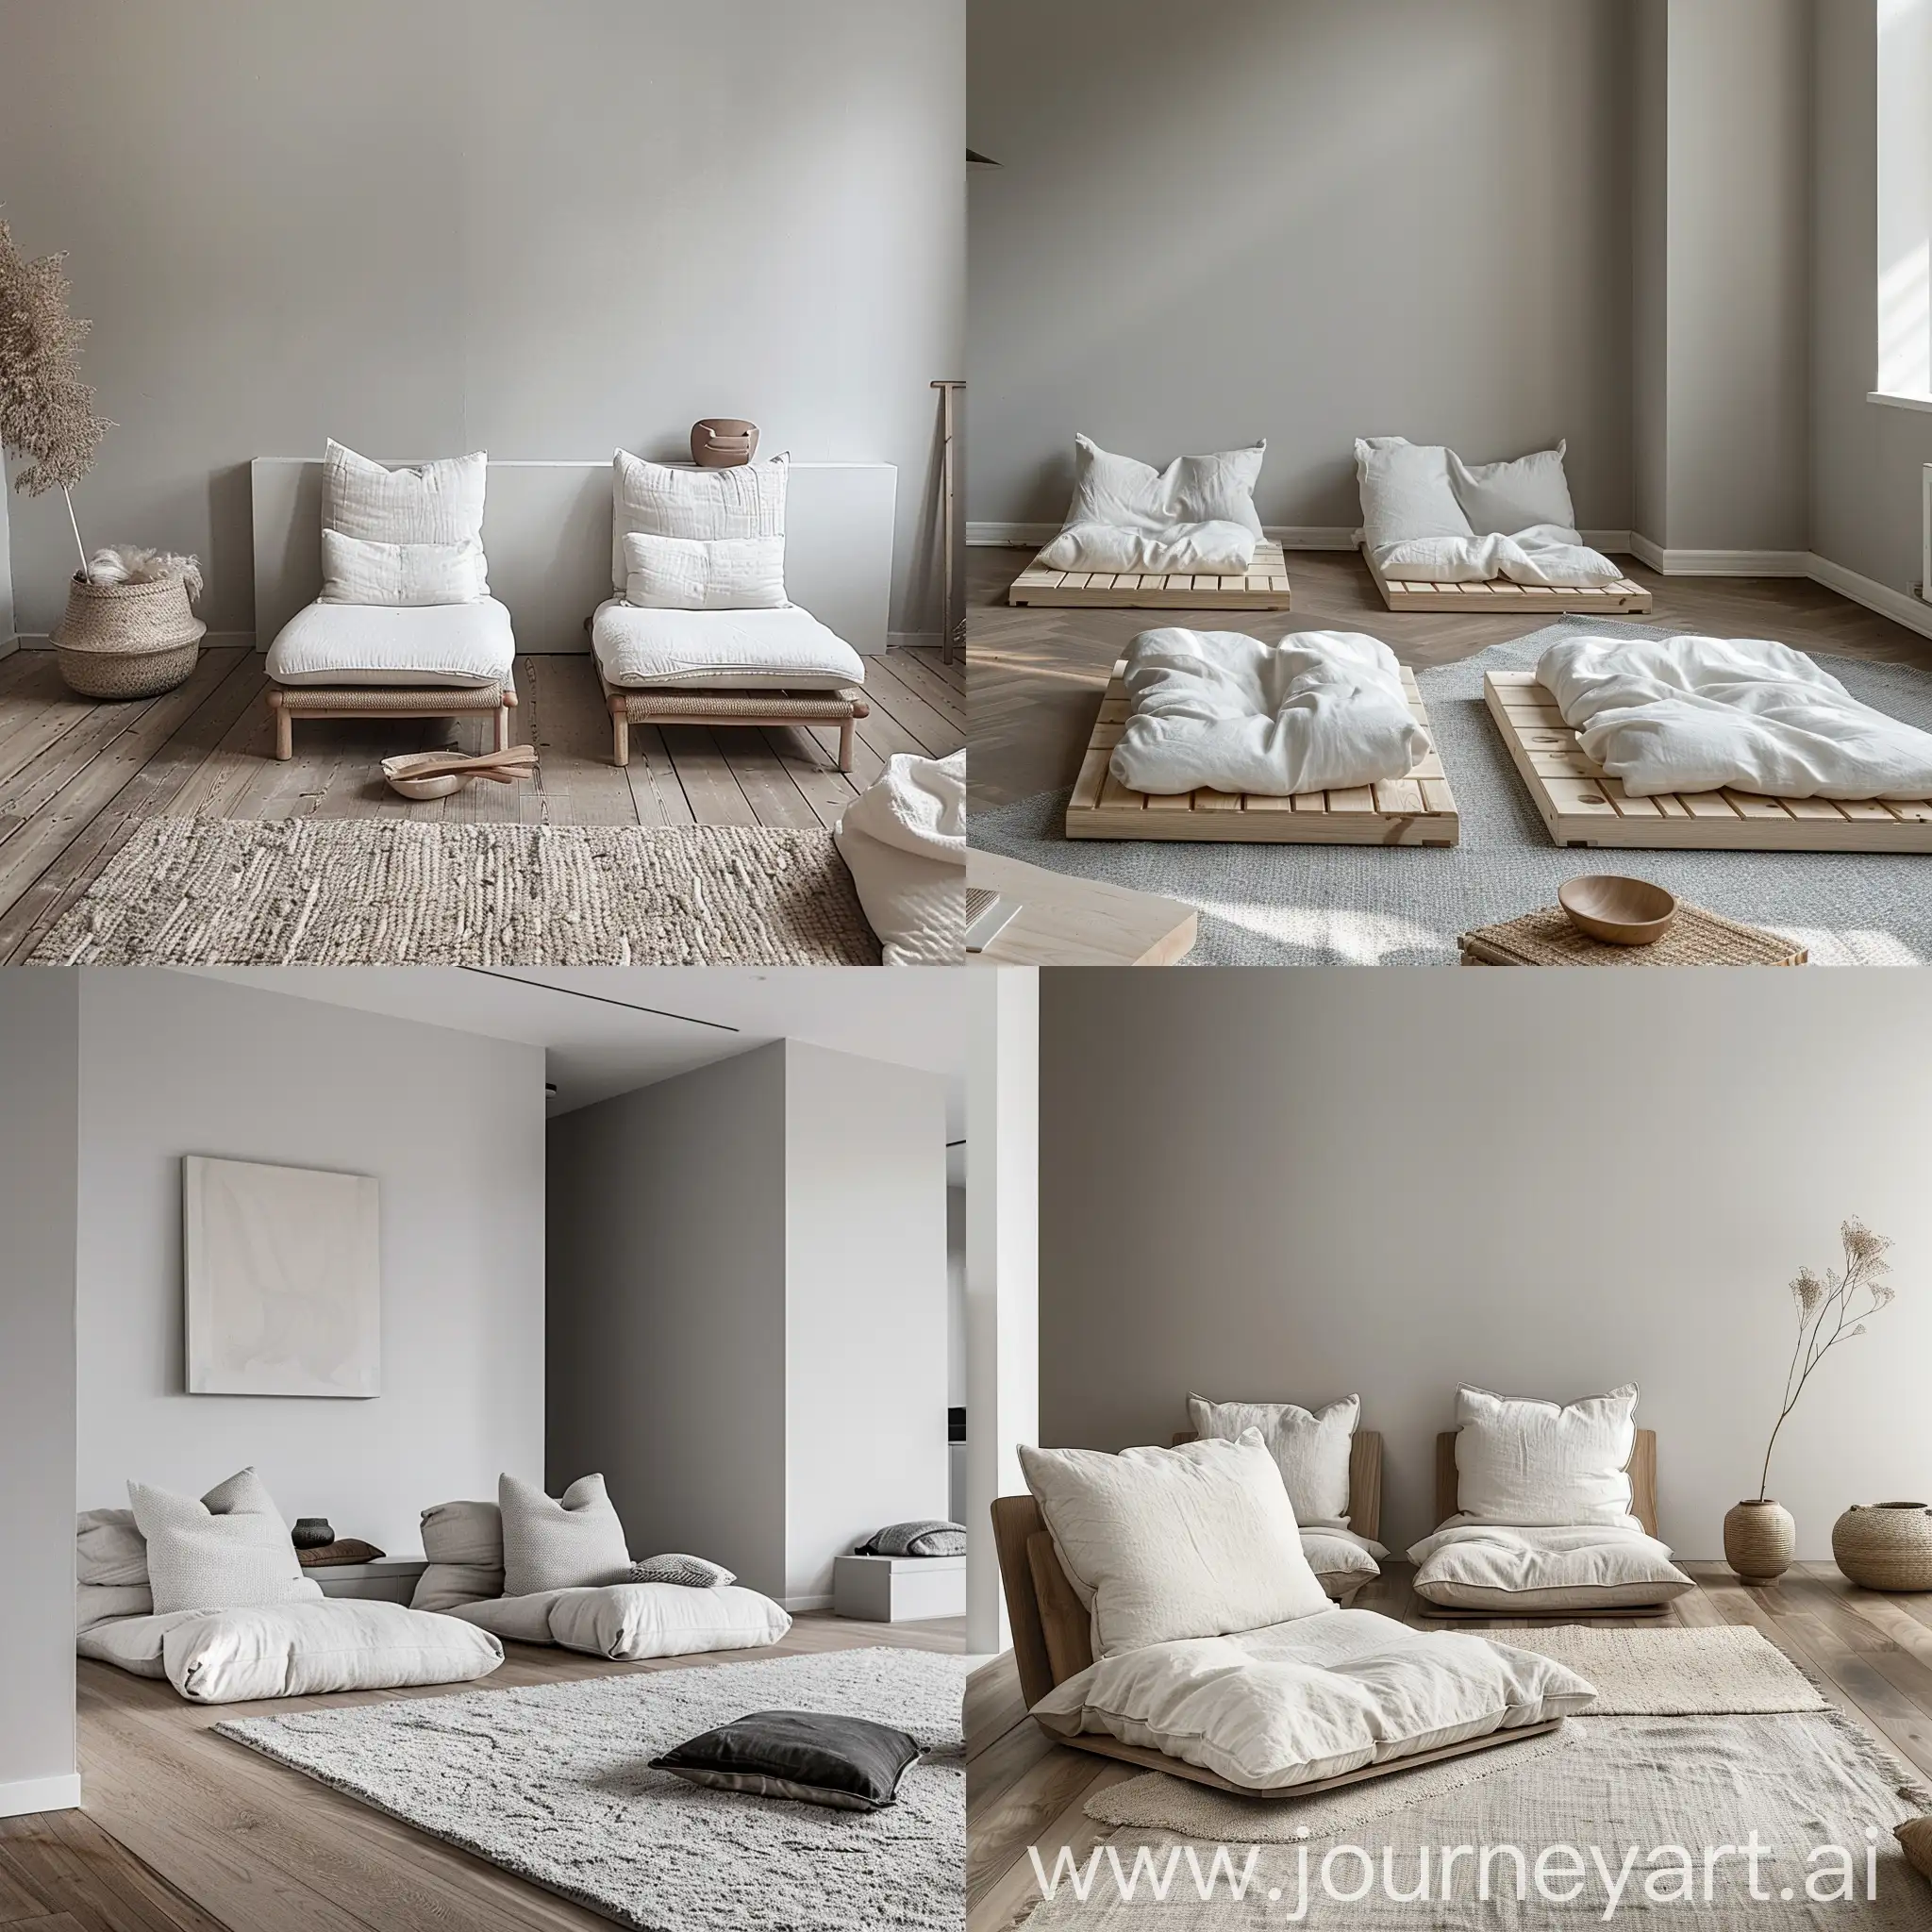 interior design, teenager's room, scandinavian style, scandinavian design, white style, living room, modular furniture with cotton textiles, wooden floor, , carpet on the floor, minimalism, minimal, clean, accent bright color, air, eclectic trends, gray, simple and functional.